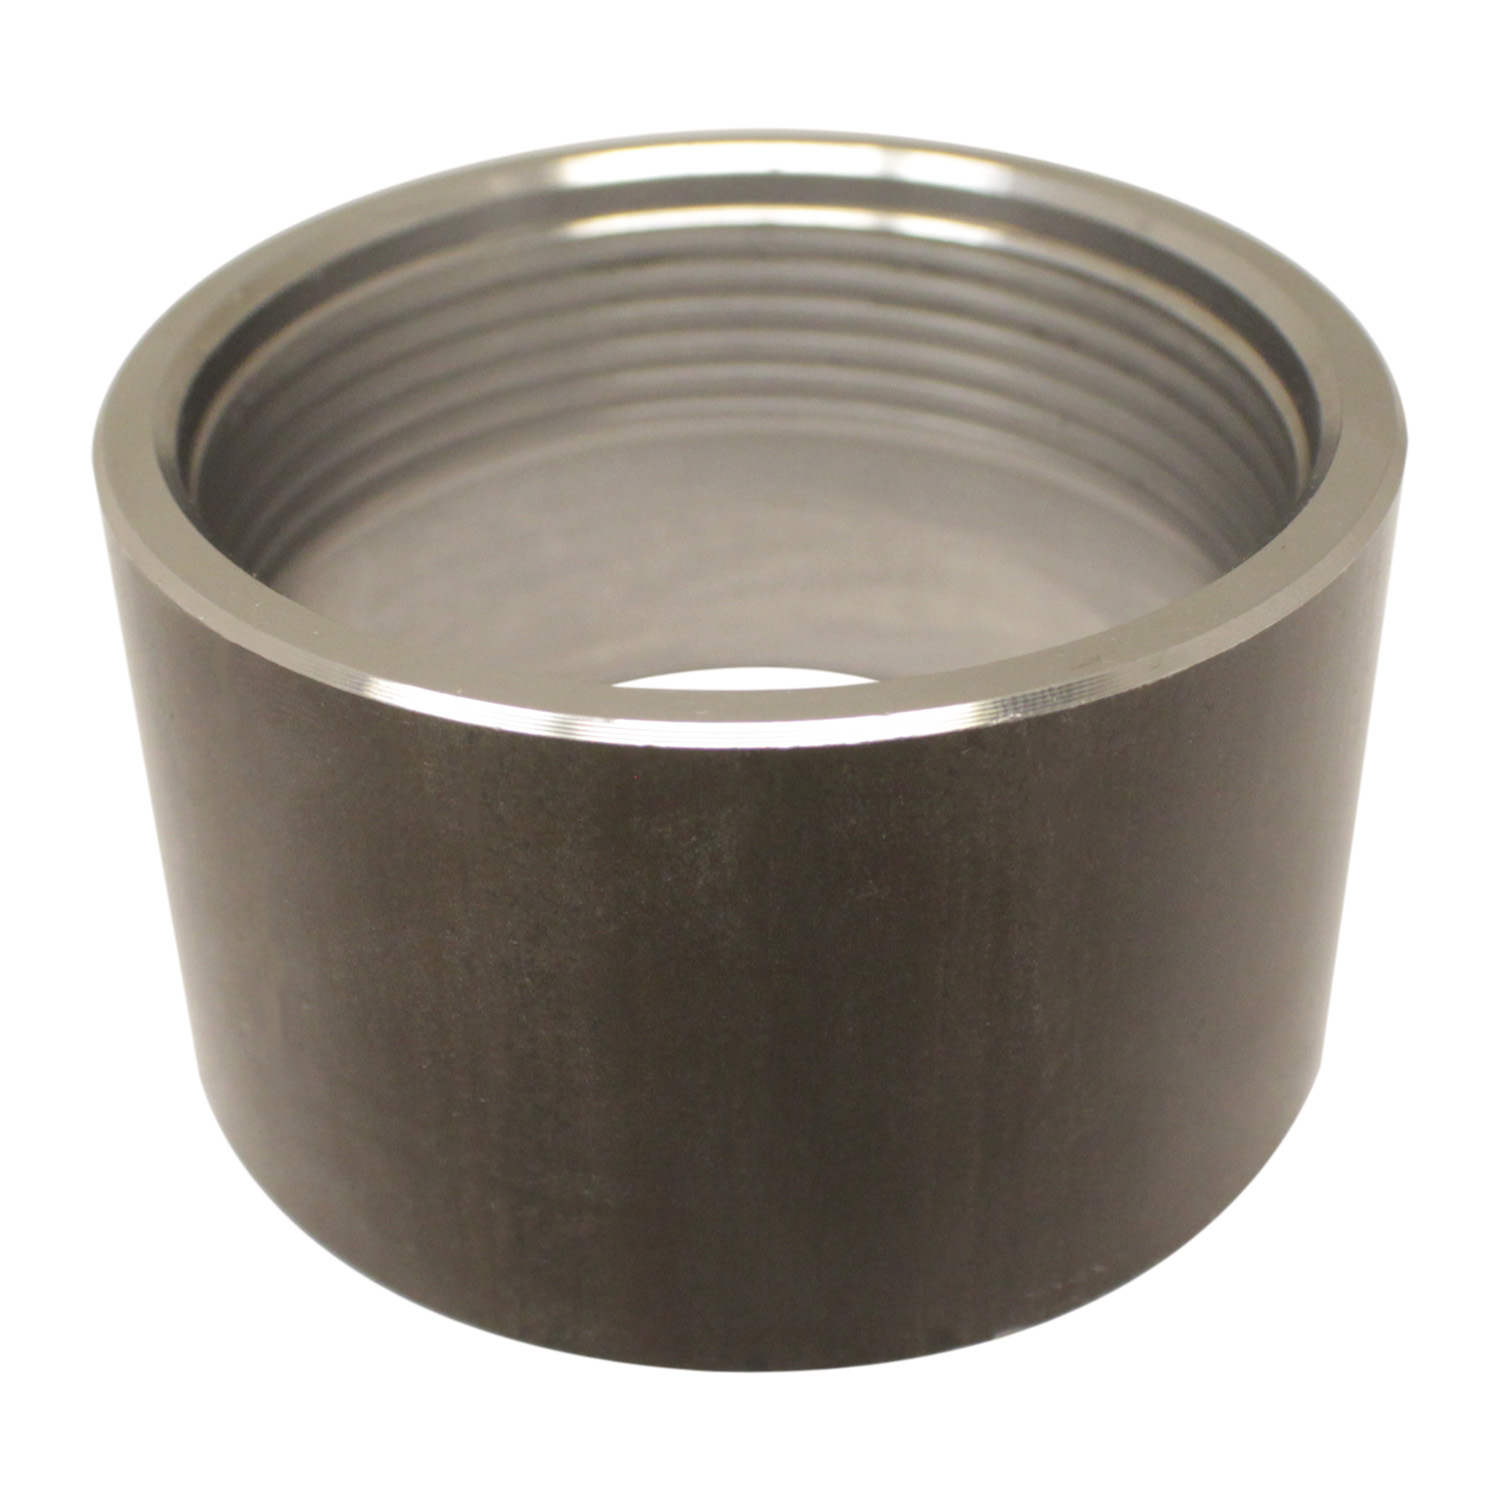 Threaded ball joint weld-in sleeve for large Mopars with a K727 style thread. . - 9033-427